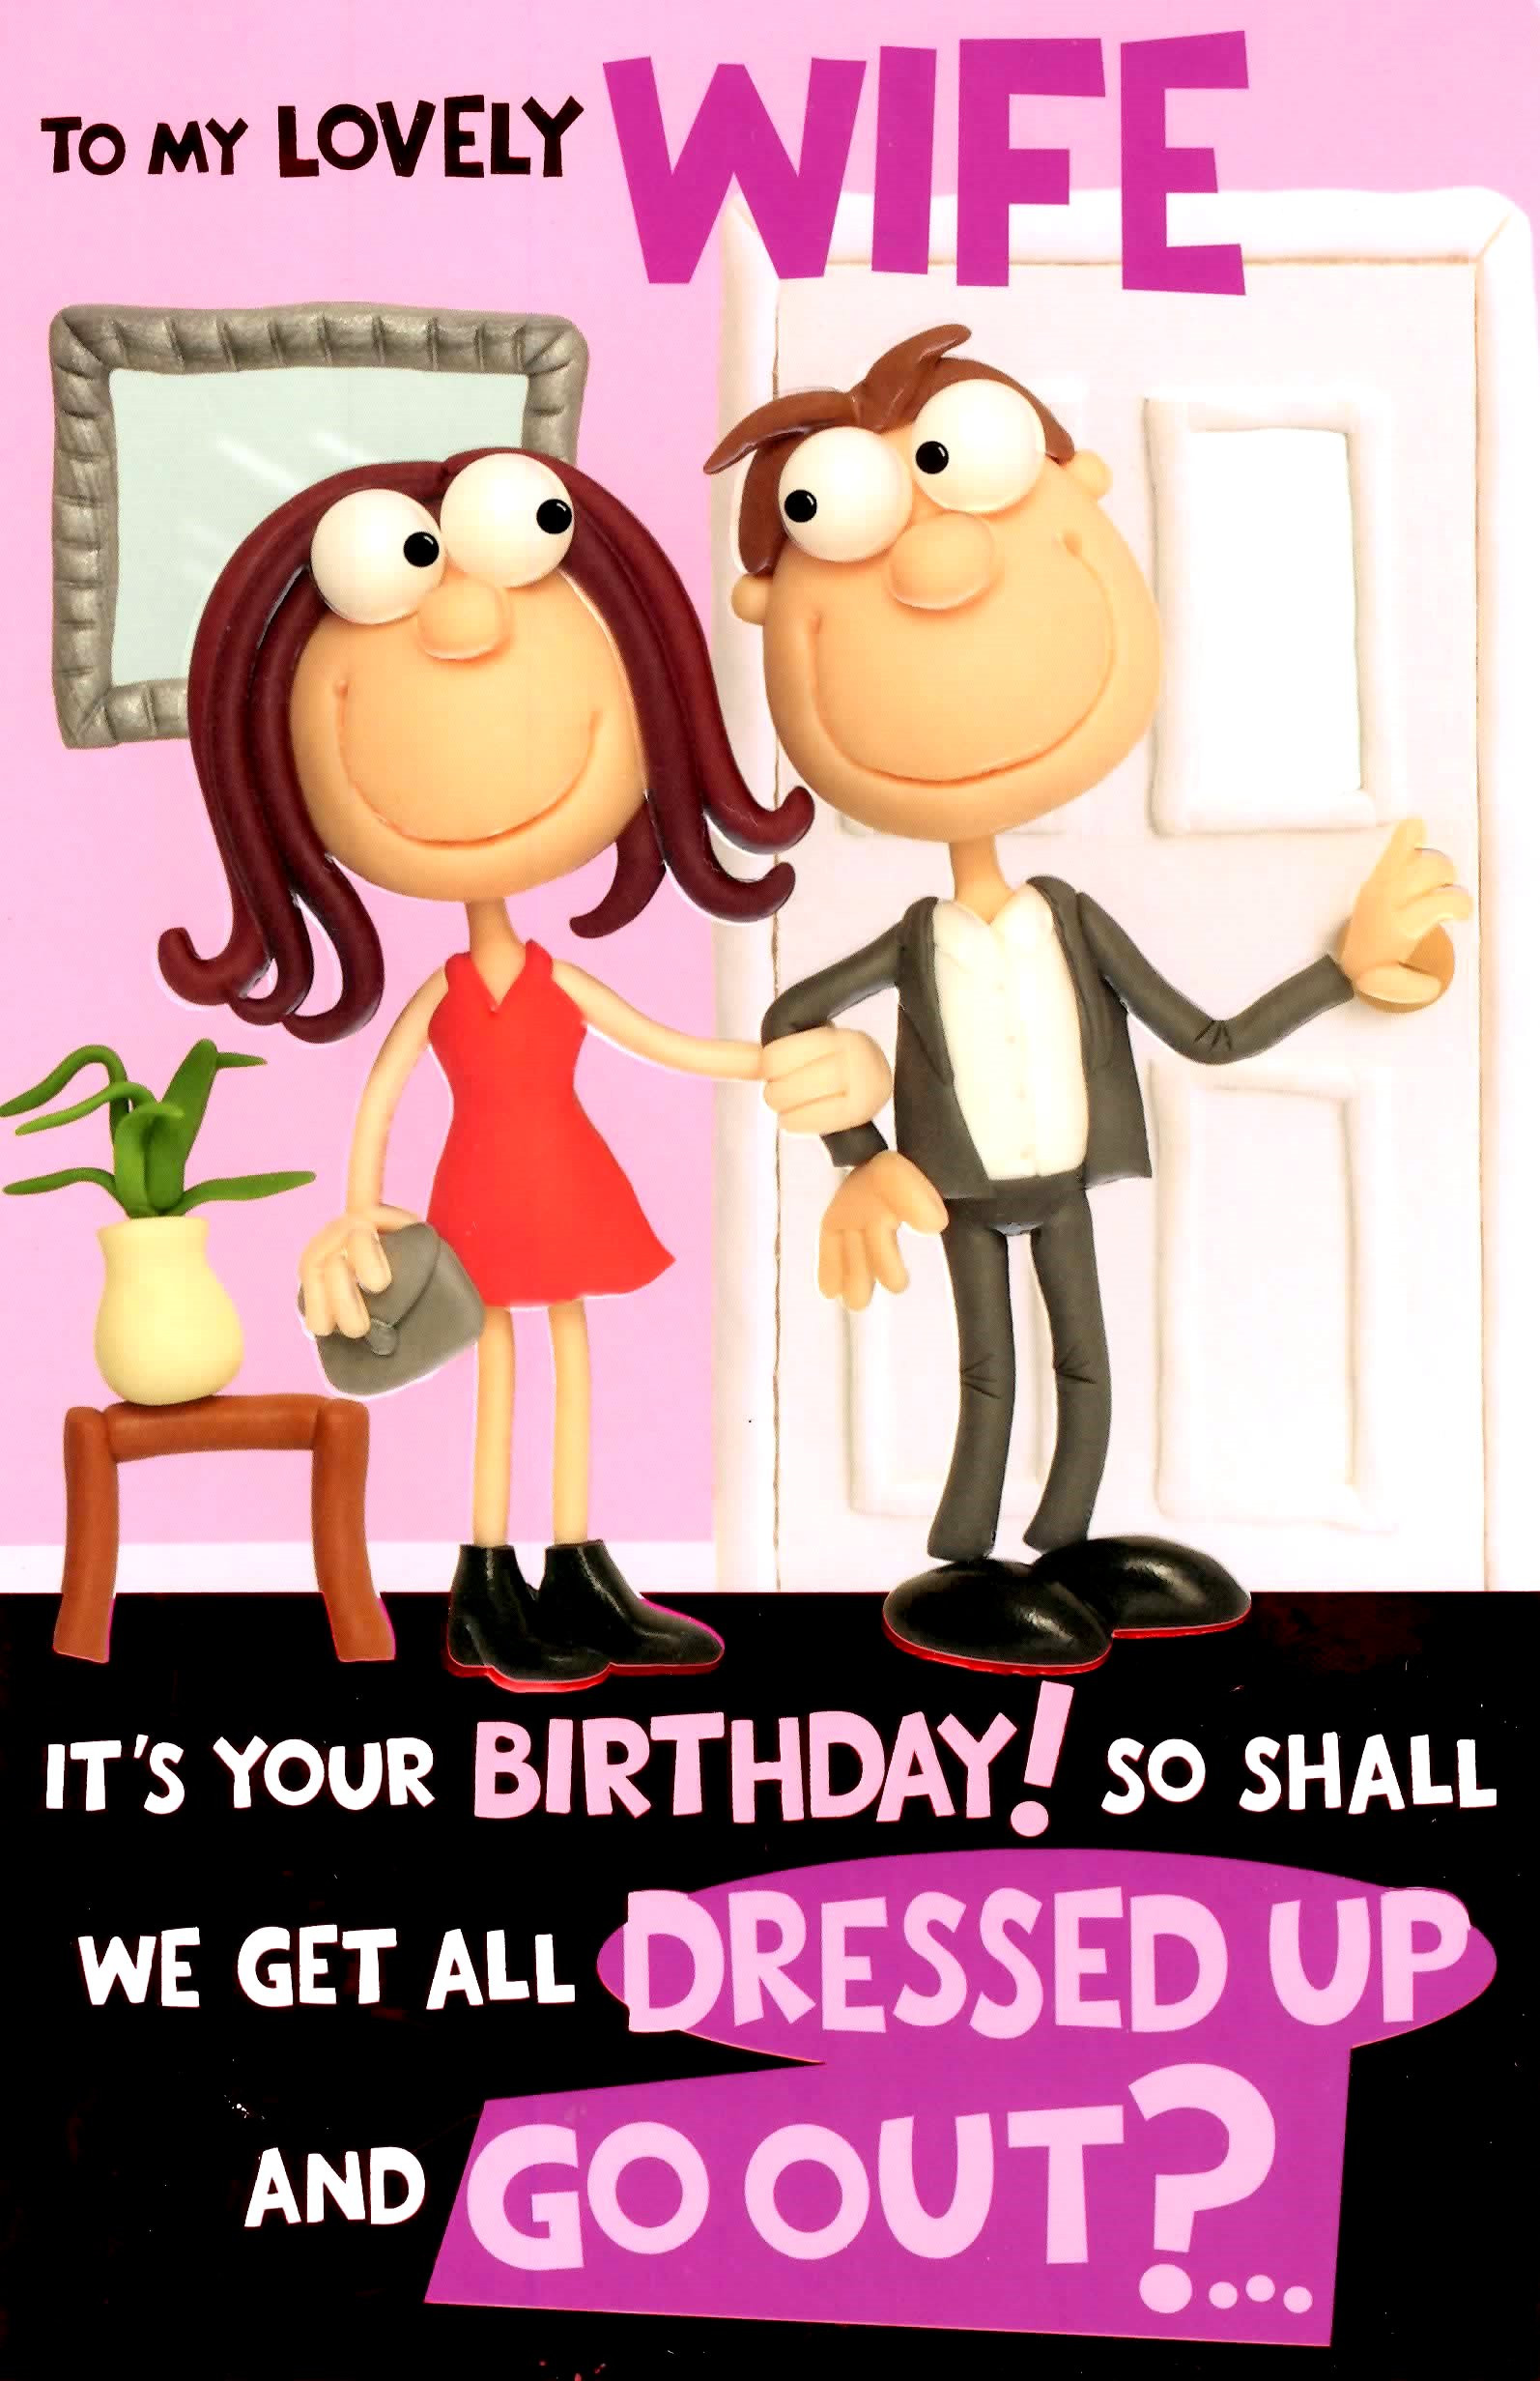 the-best-wife-birthday-card-message-home-family-style-and-art-ideas